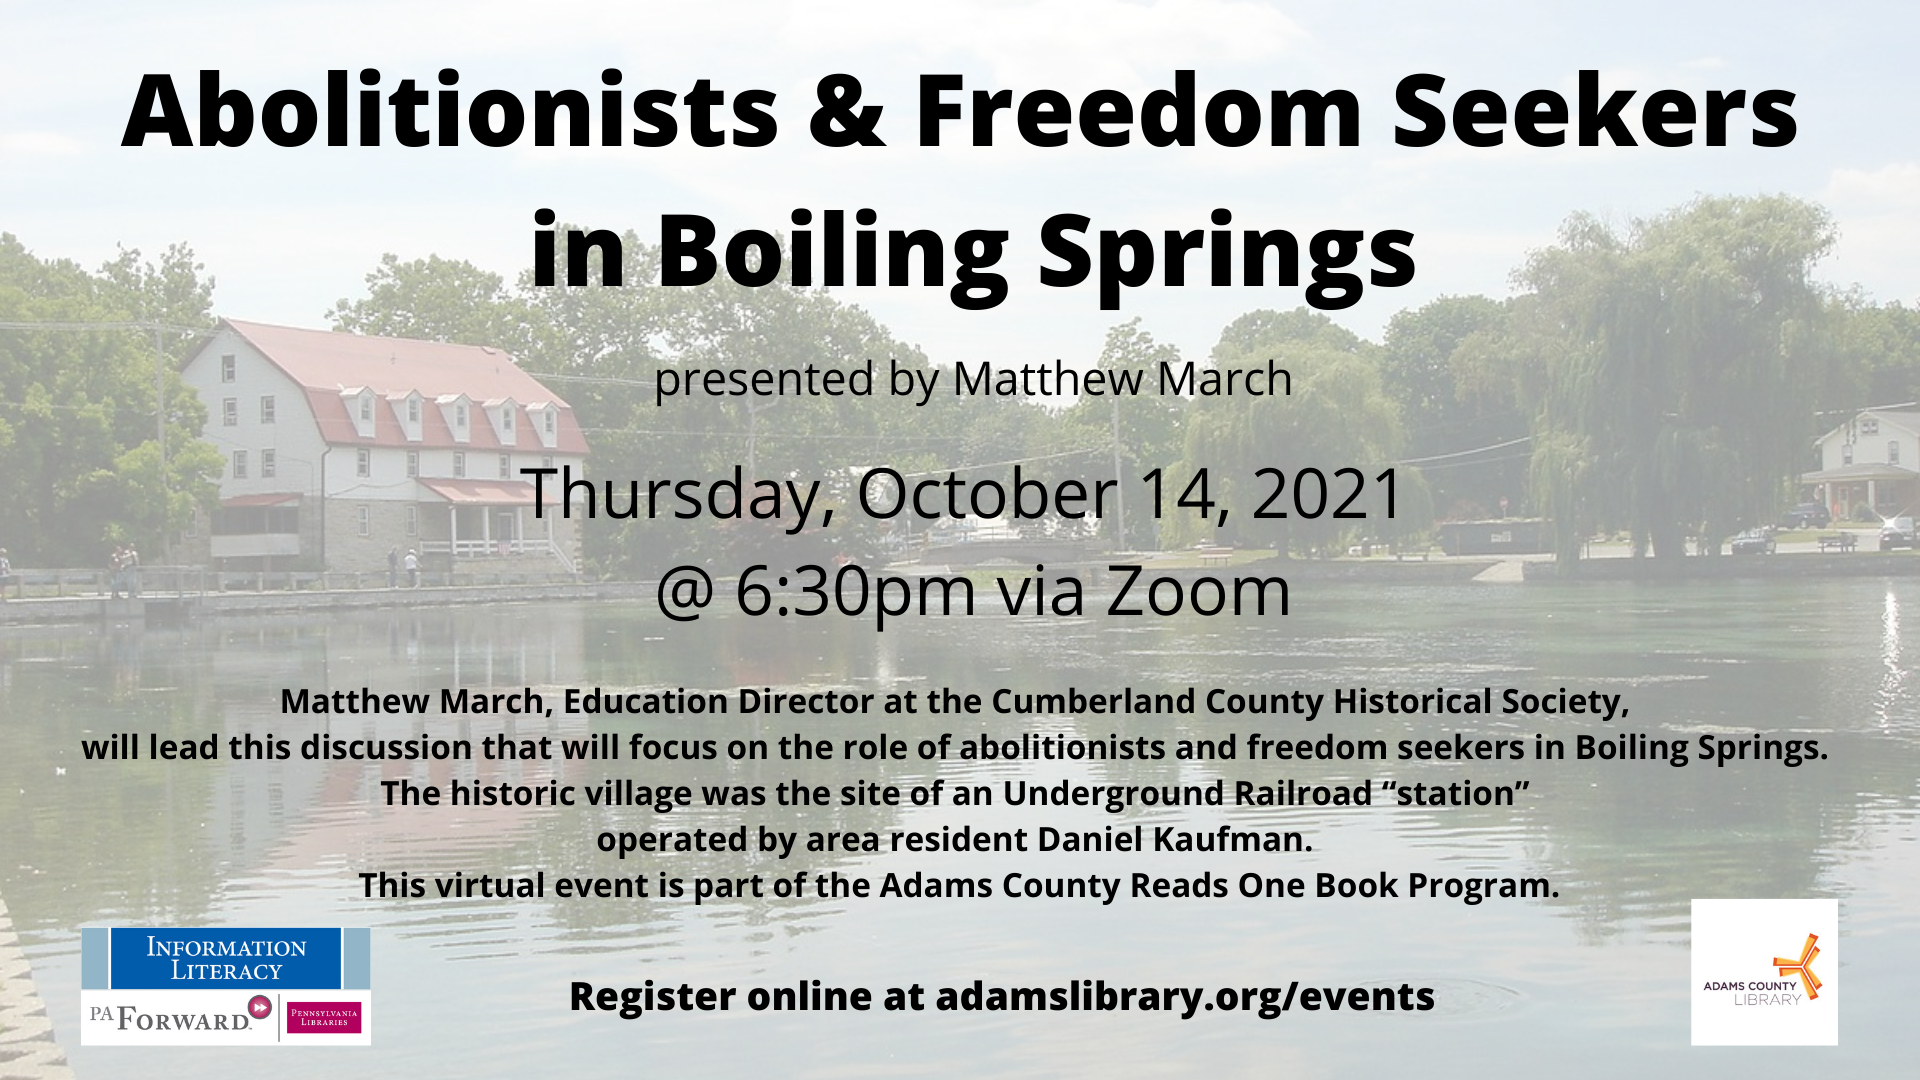 Join us on Thursday, October 14th at 6:30pm via Zoom for the Adams County Reads One Book program "Abolitionists & Freedom Seekers in Boiling Springs" presented by Matthew March.